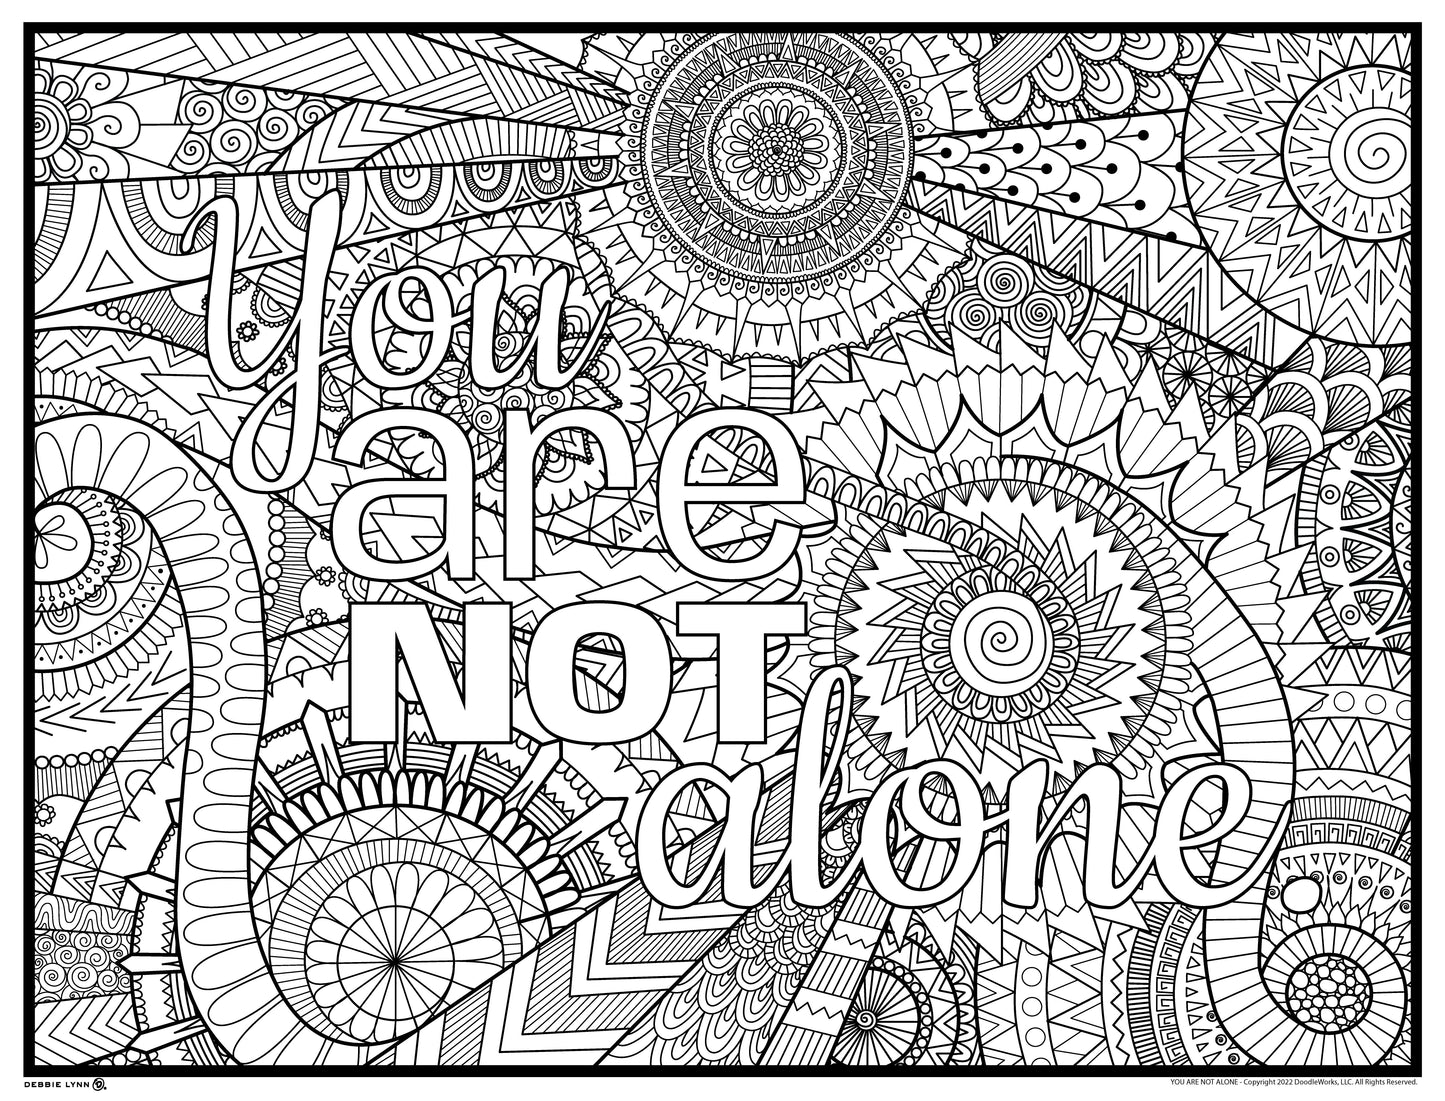 You Are Not Alone Personalized Giant Coloring Poster  46"x60"